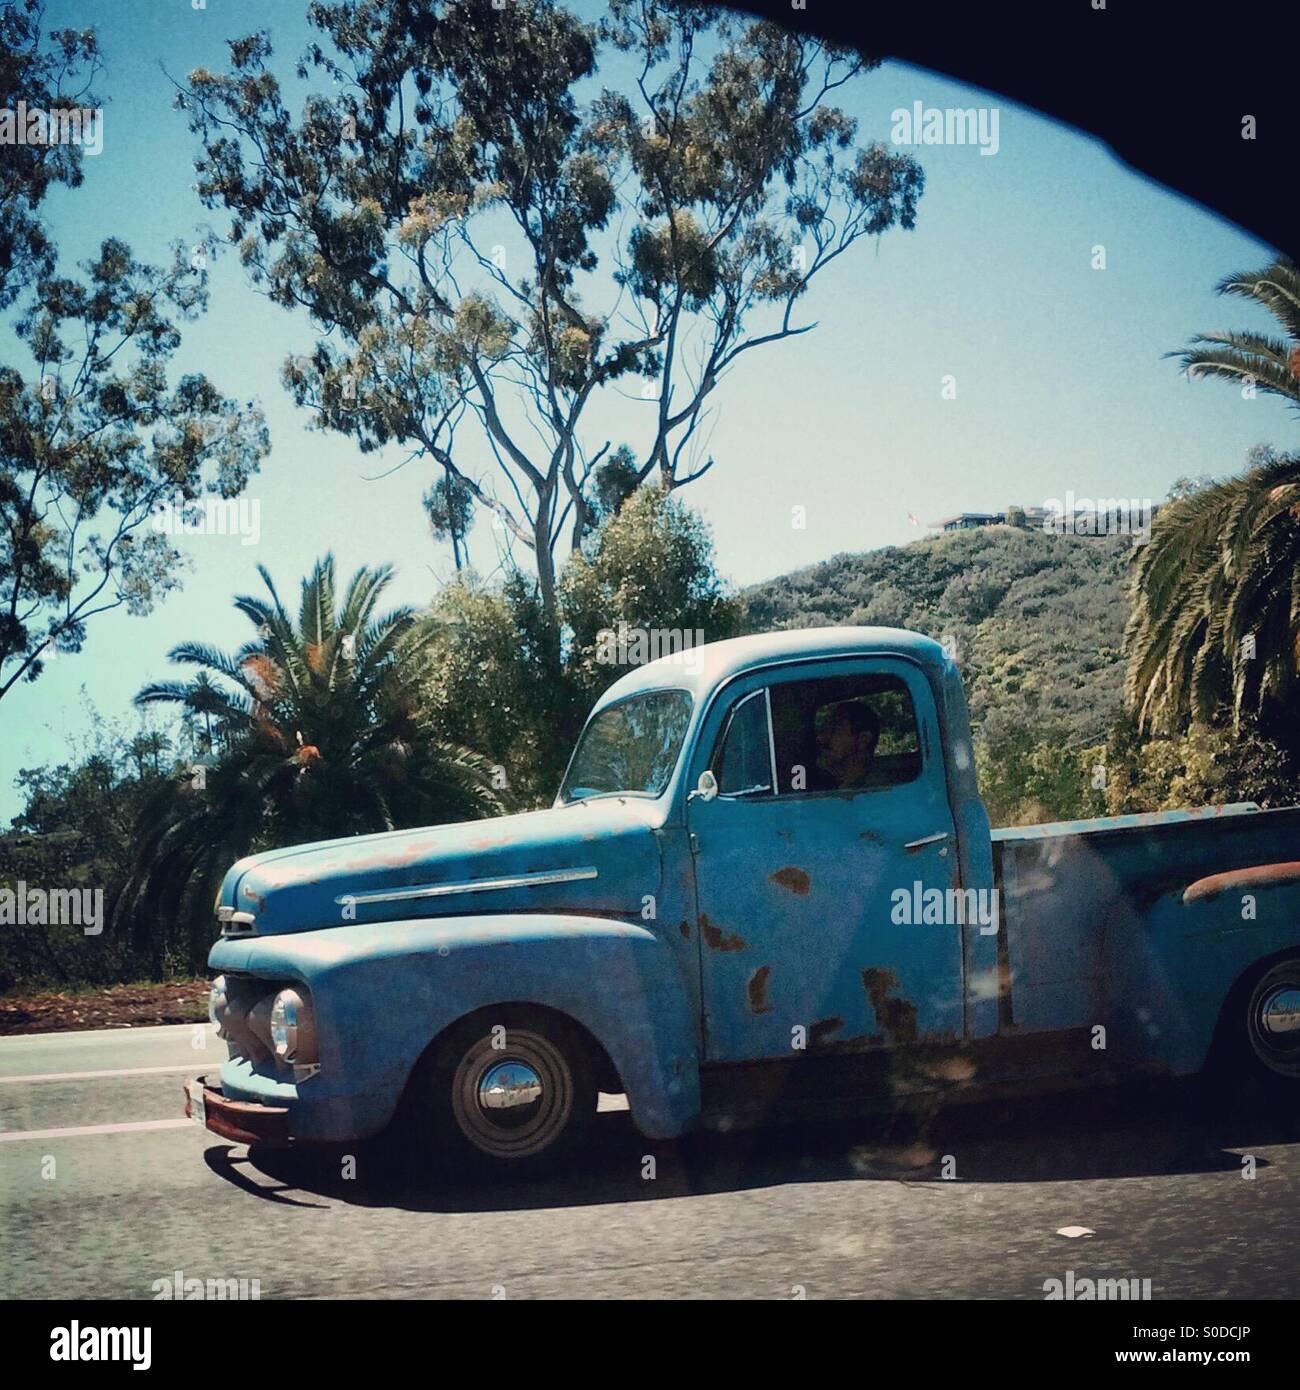 Old blue truck Stock Photo